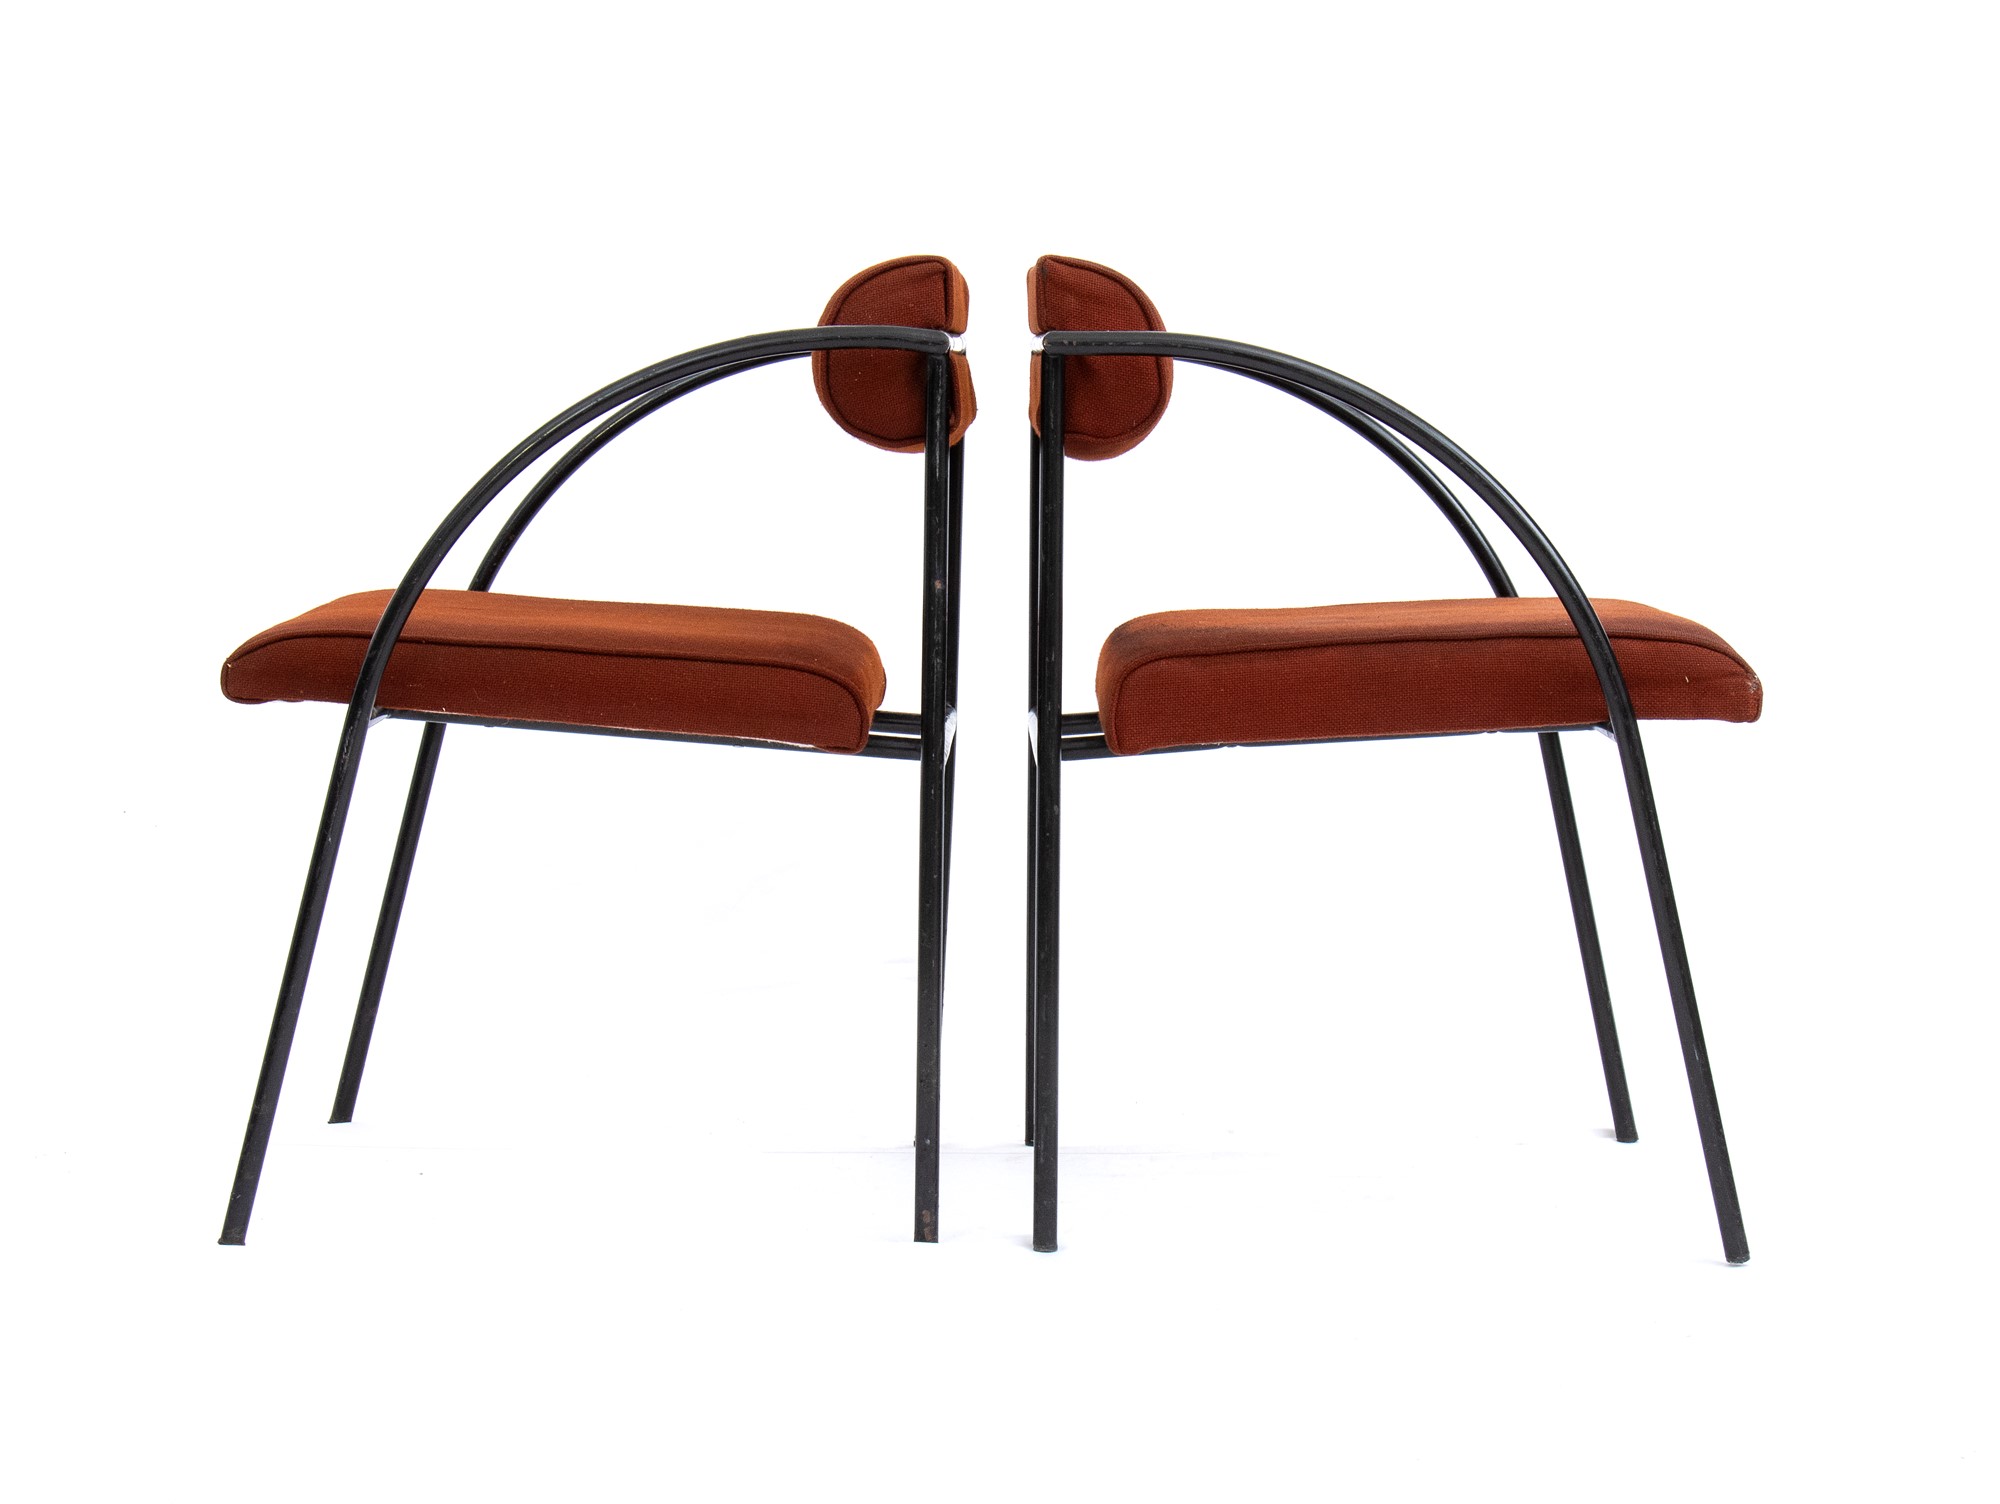 Rodney Kinsman Londra 1943 Set of two Wien chairs with round metal structure and curved armrests - Image 11 of 15